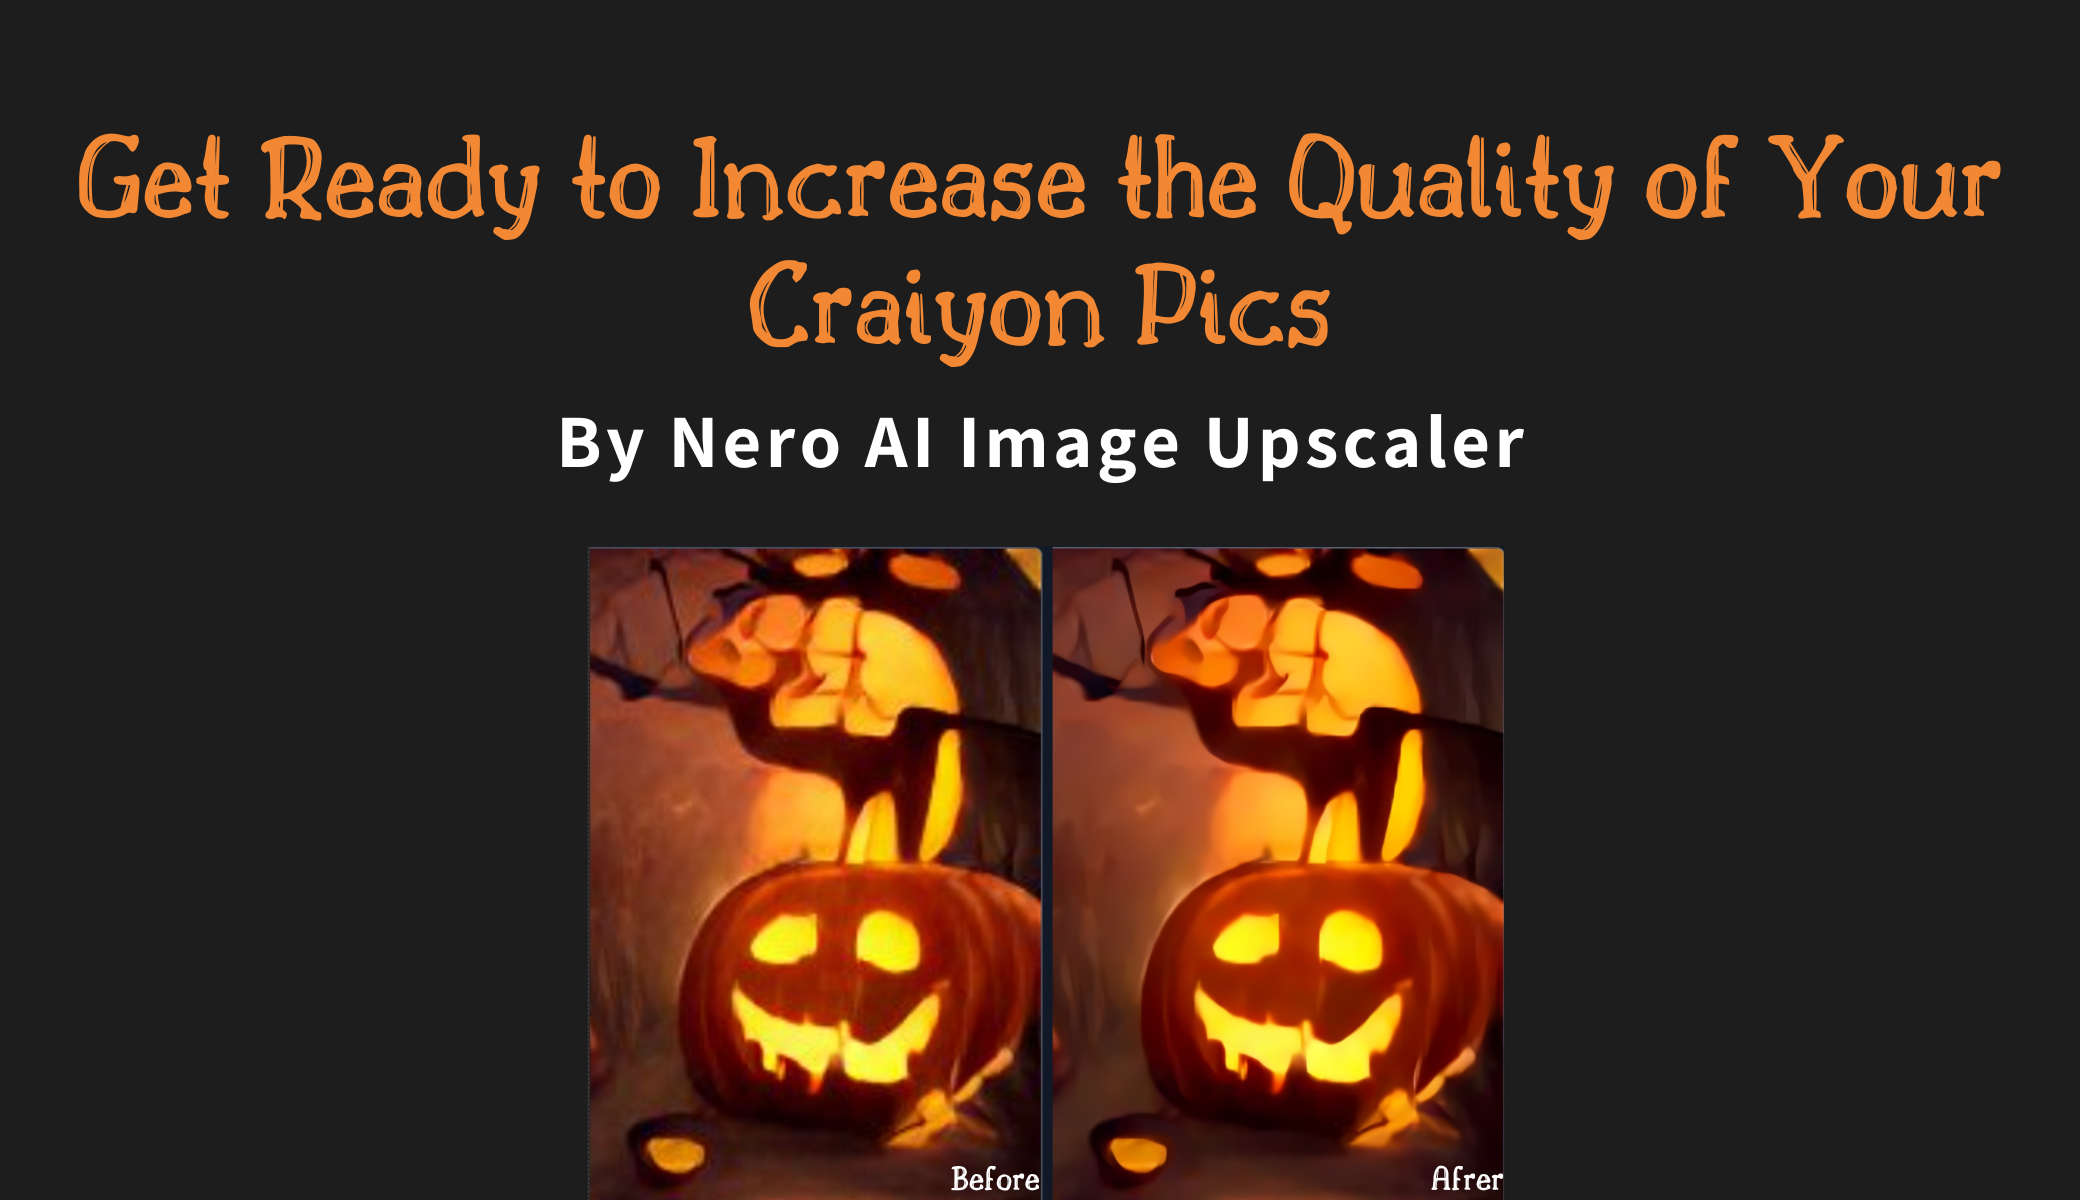 Get Ready to Increase the Quality of Your Craiyon Pics by Nero AI Image Upscaler